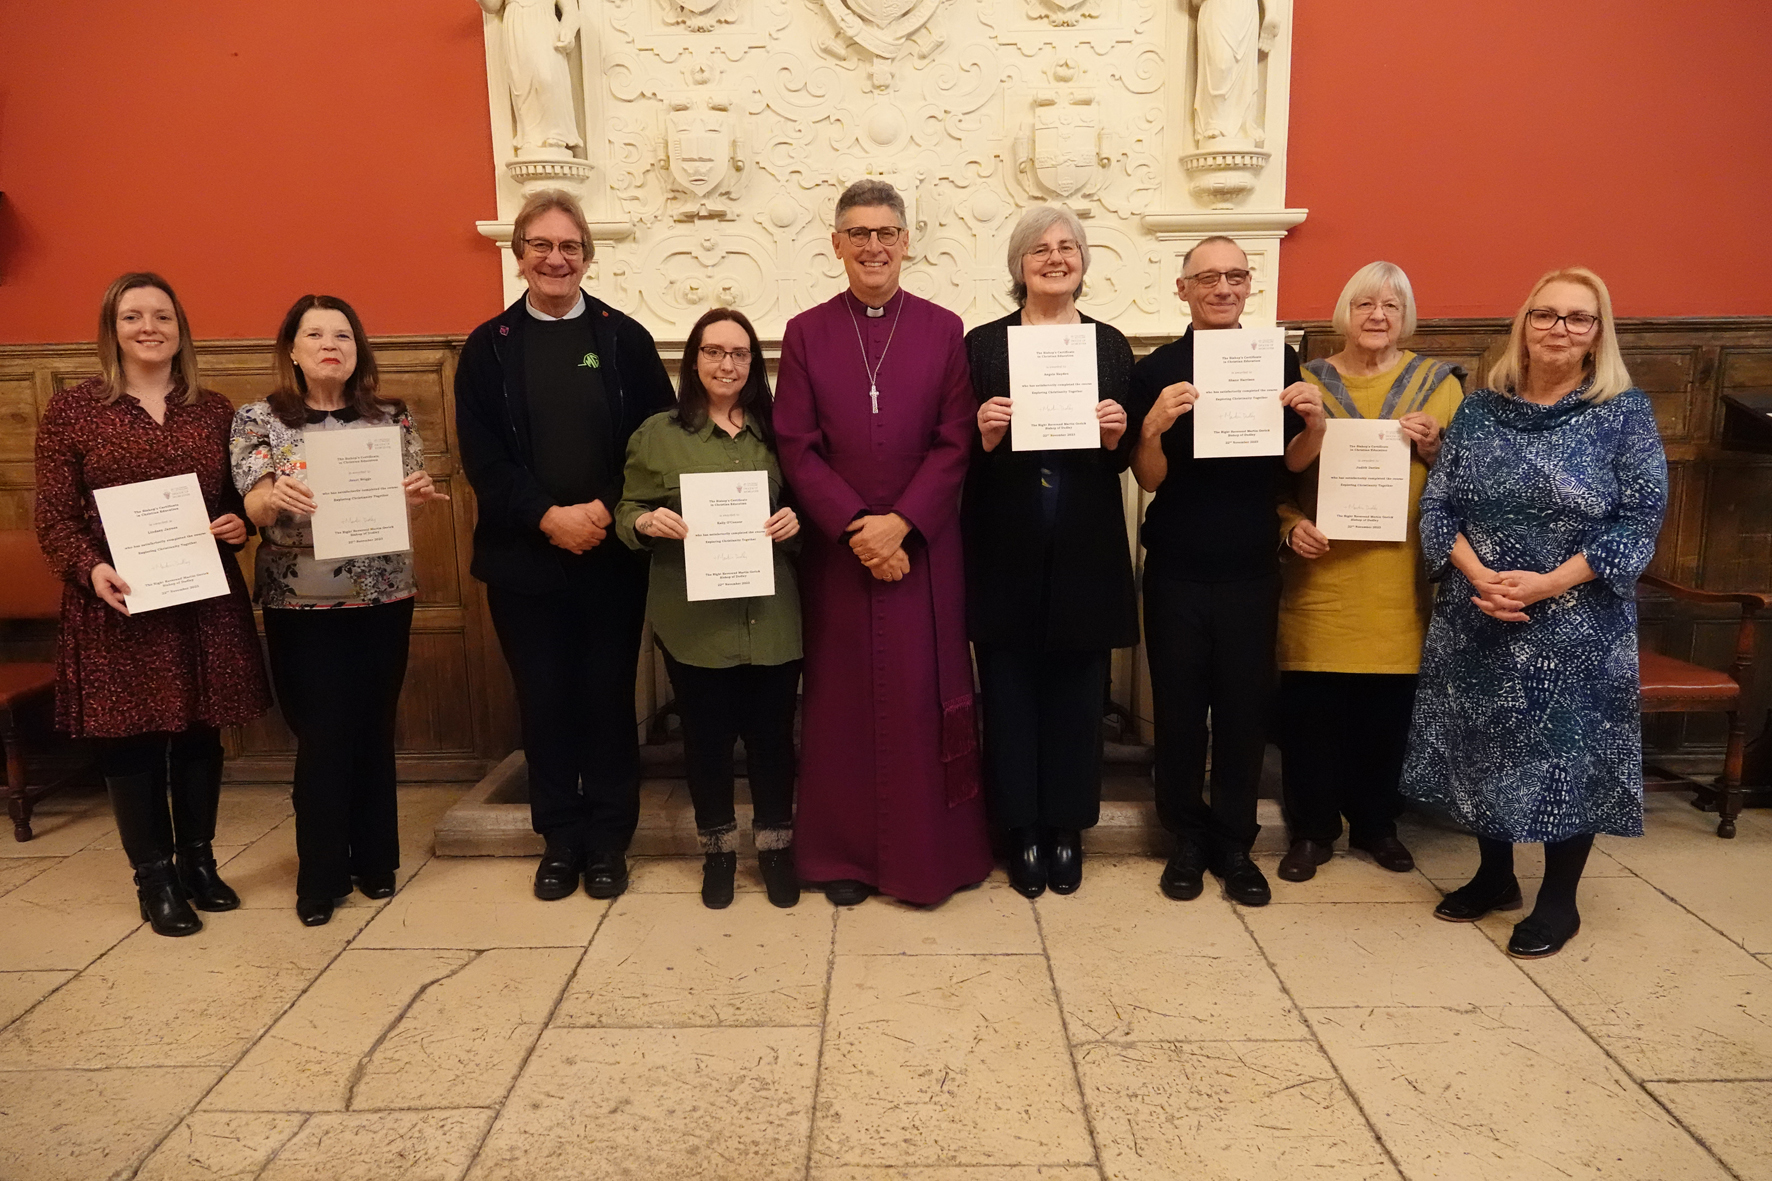 The group who did their bishops certificate in Cradley Heath standing with Bishop Martin